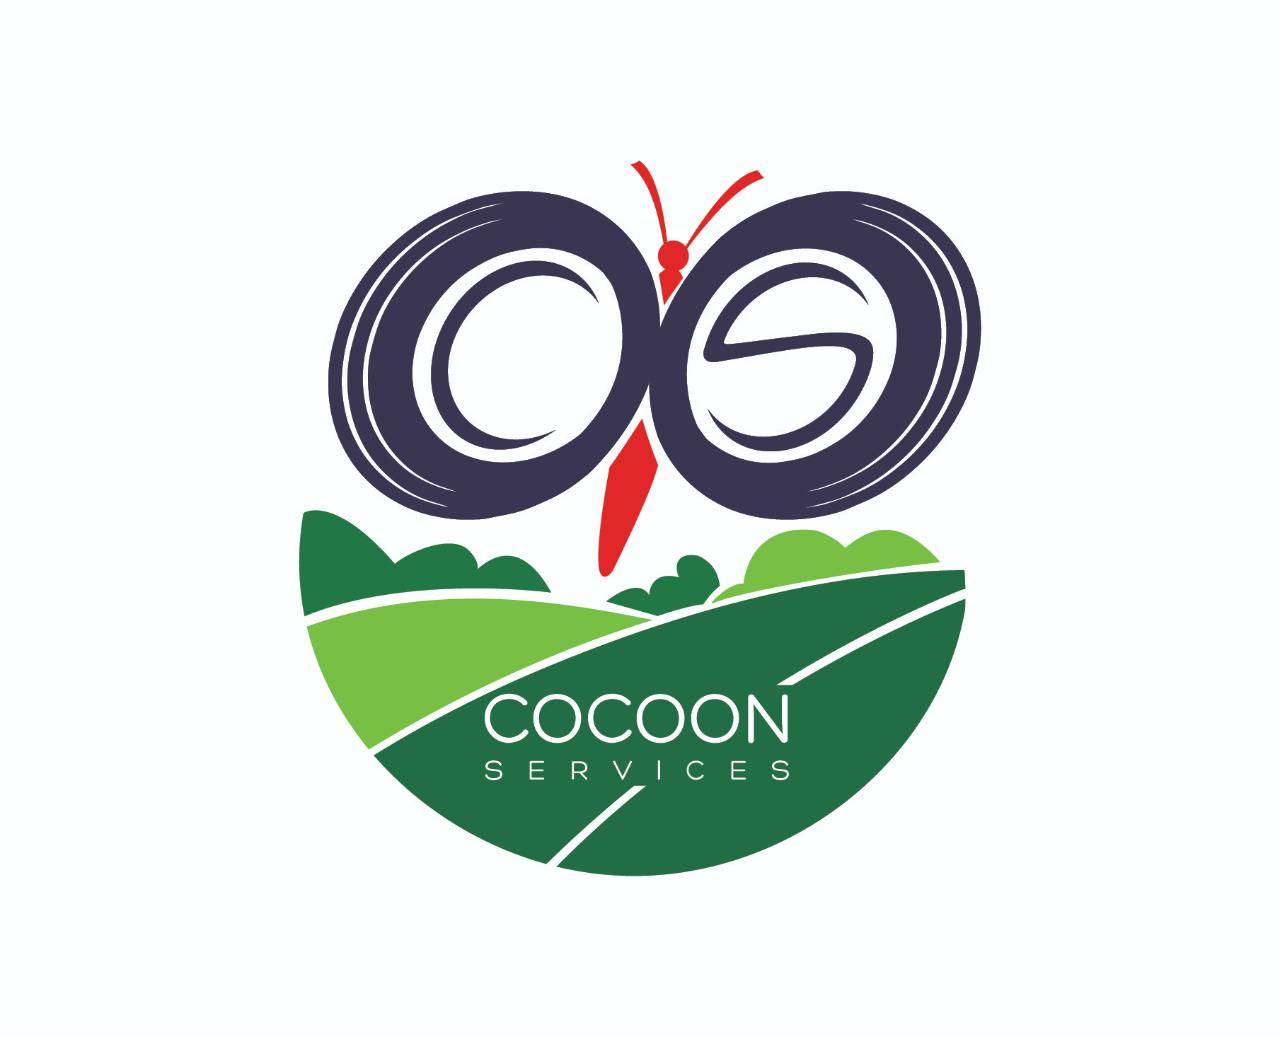 CocoonServices